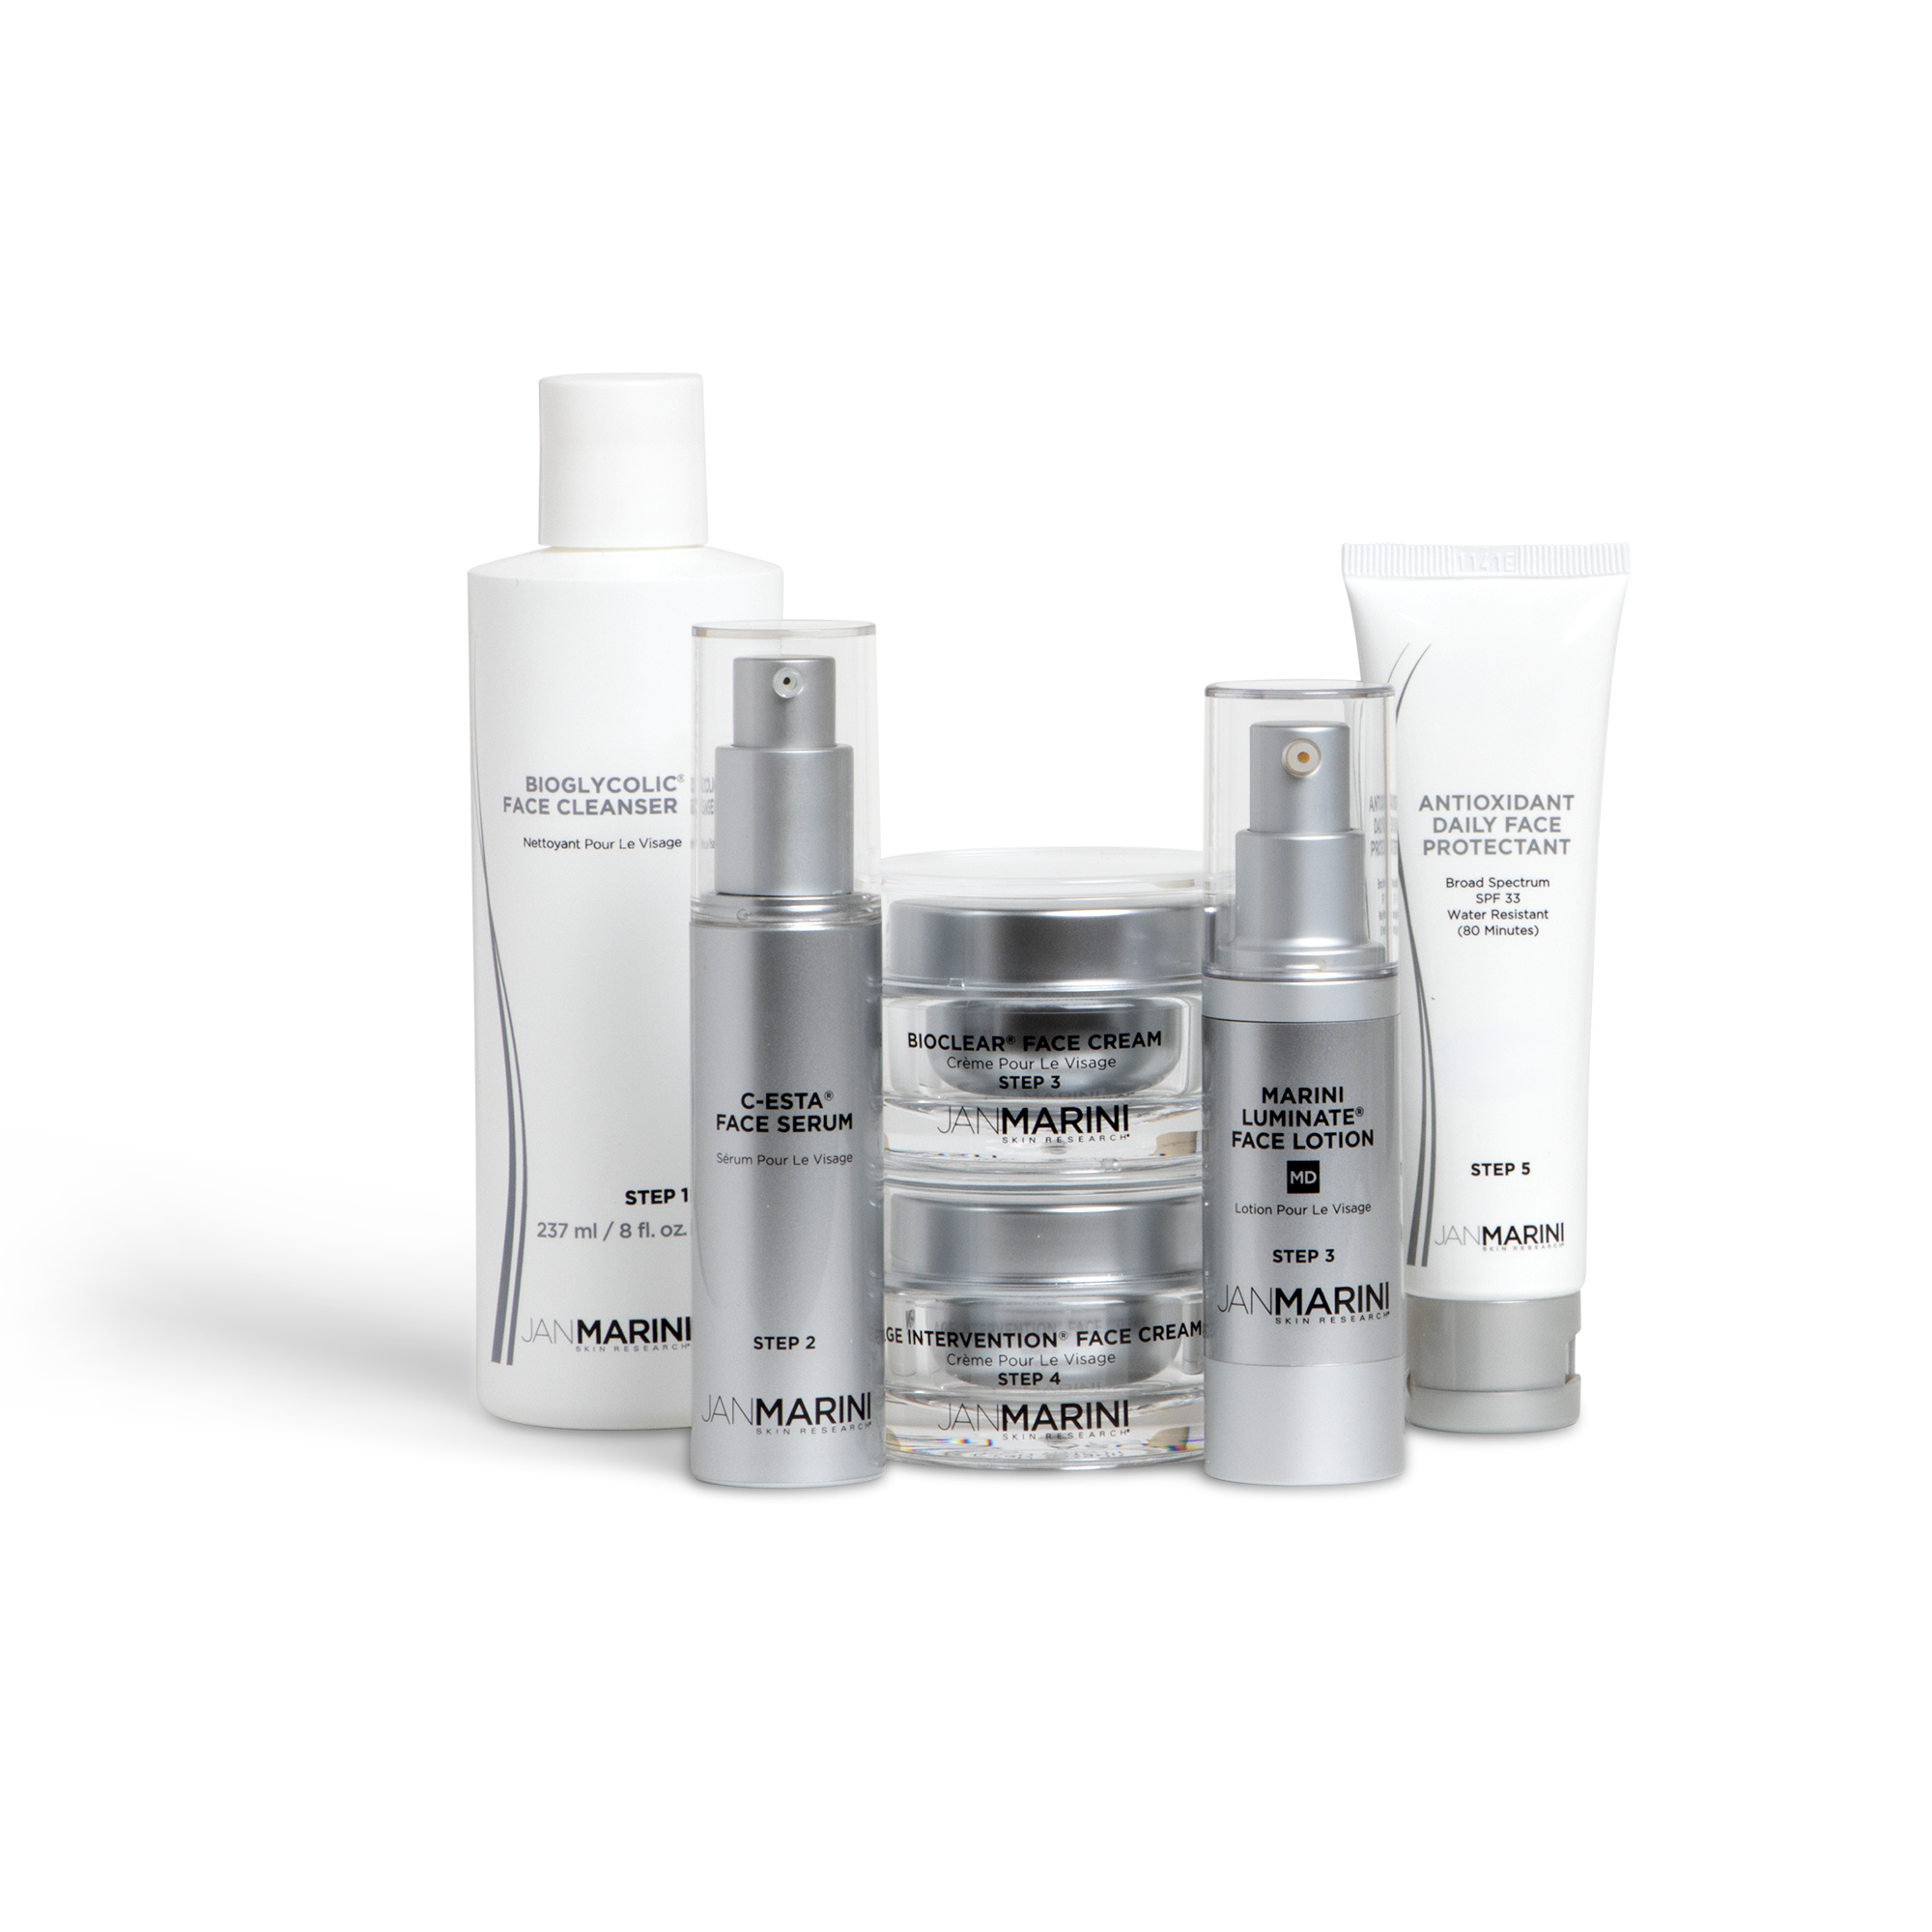 Jan Marini A Skin Care Management System - MD Dry/Very Dry with Daily Face Protectant SPF 33